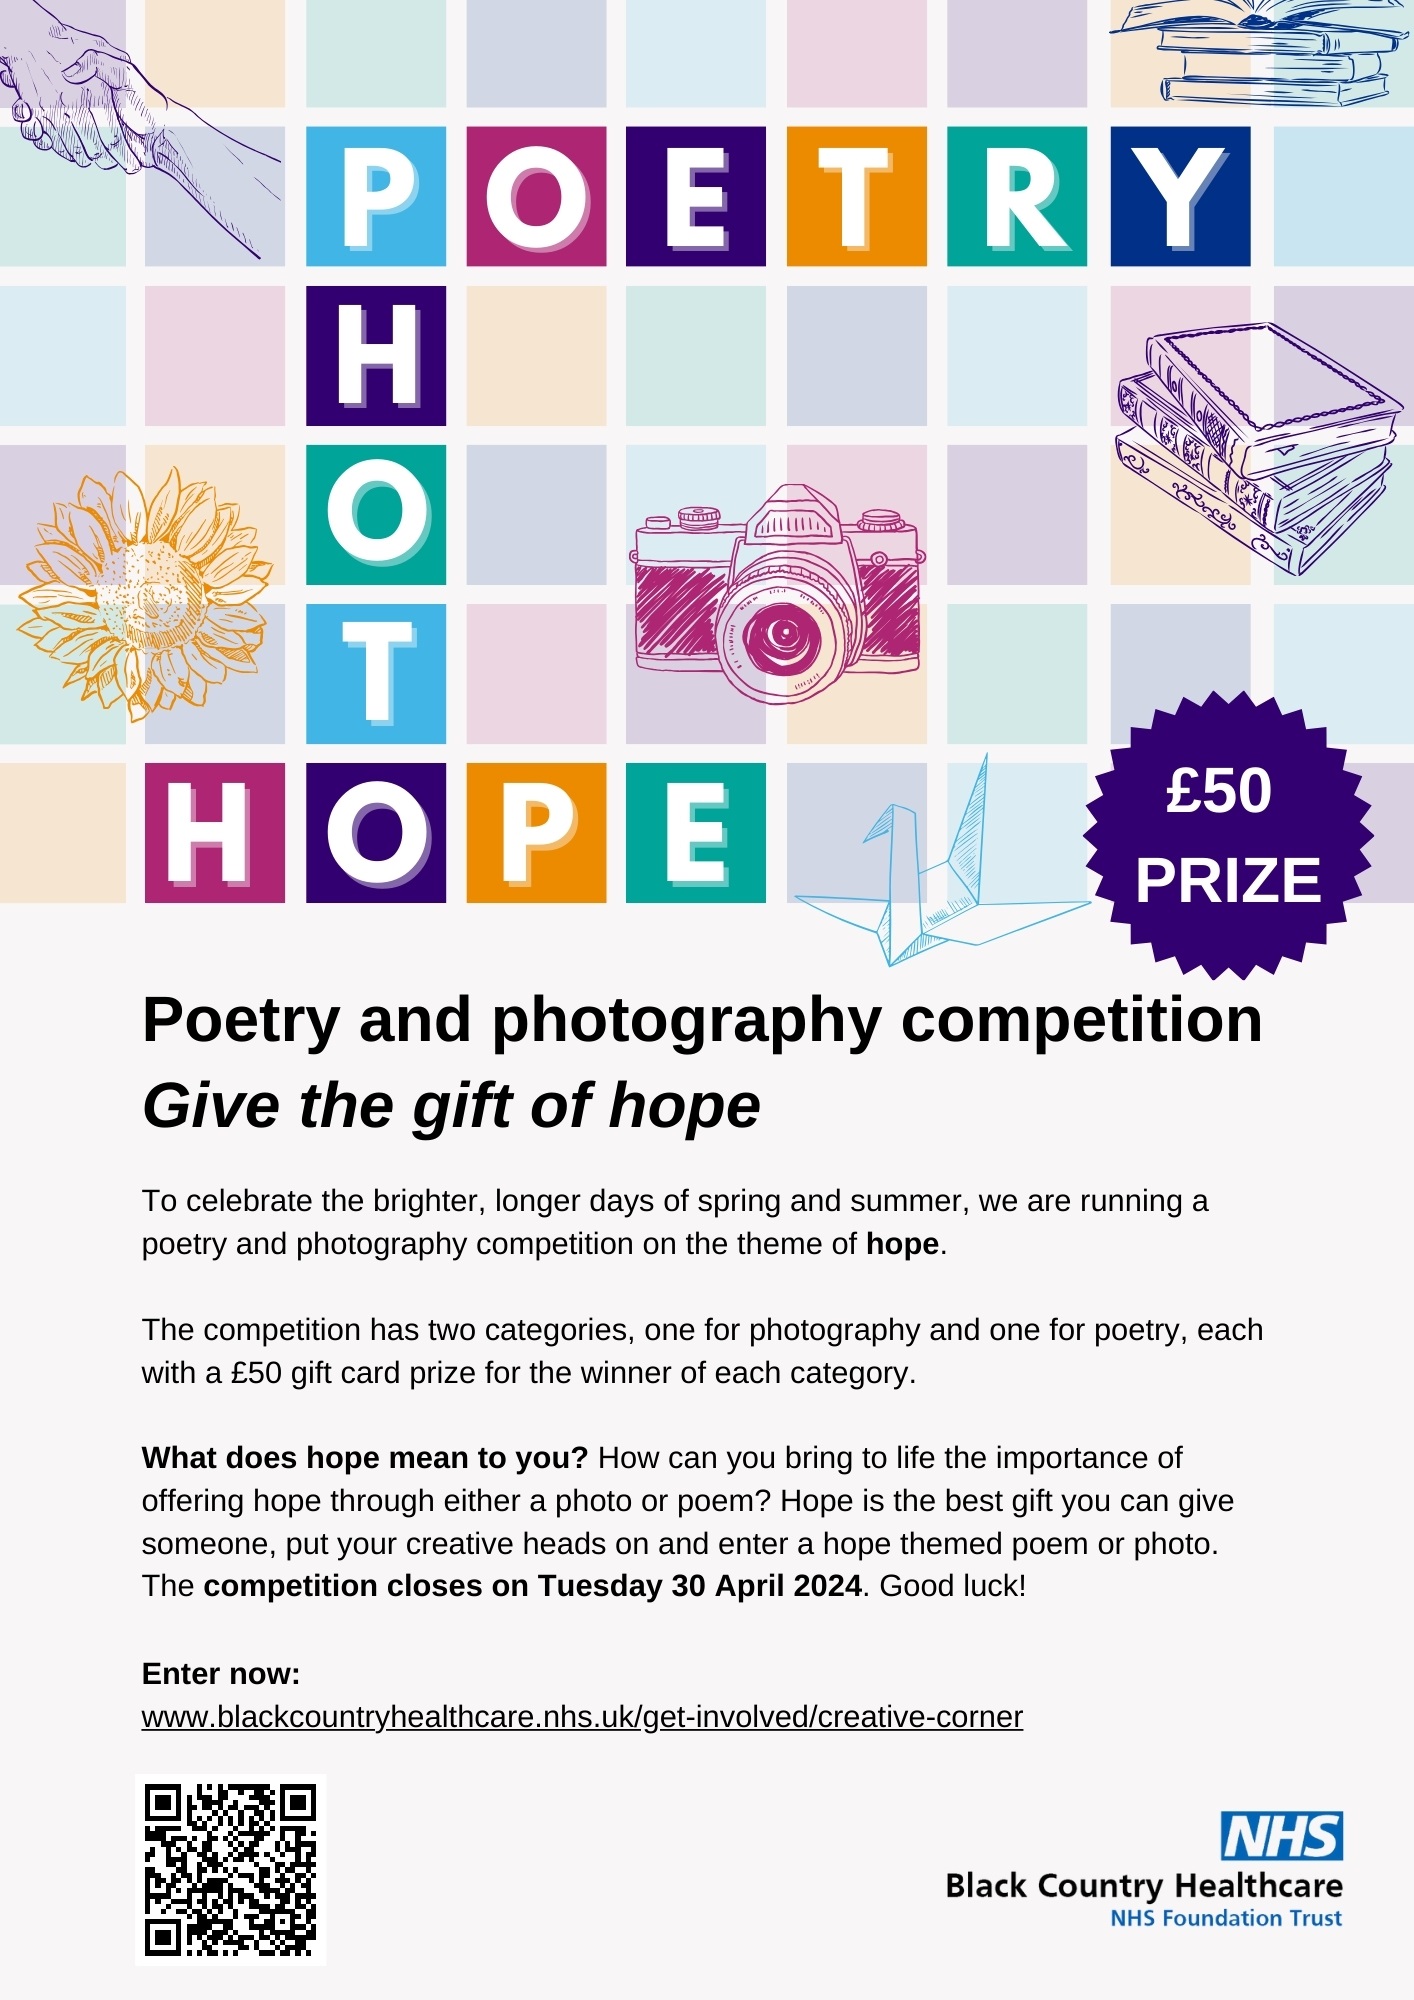 Poetry and Photograph Competition - Black Country Healthcare Foundation Trust (BCHFT)